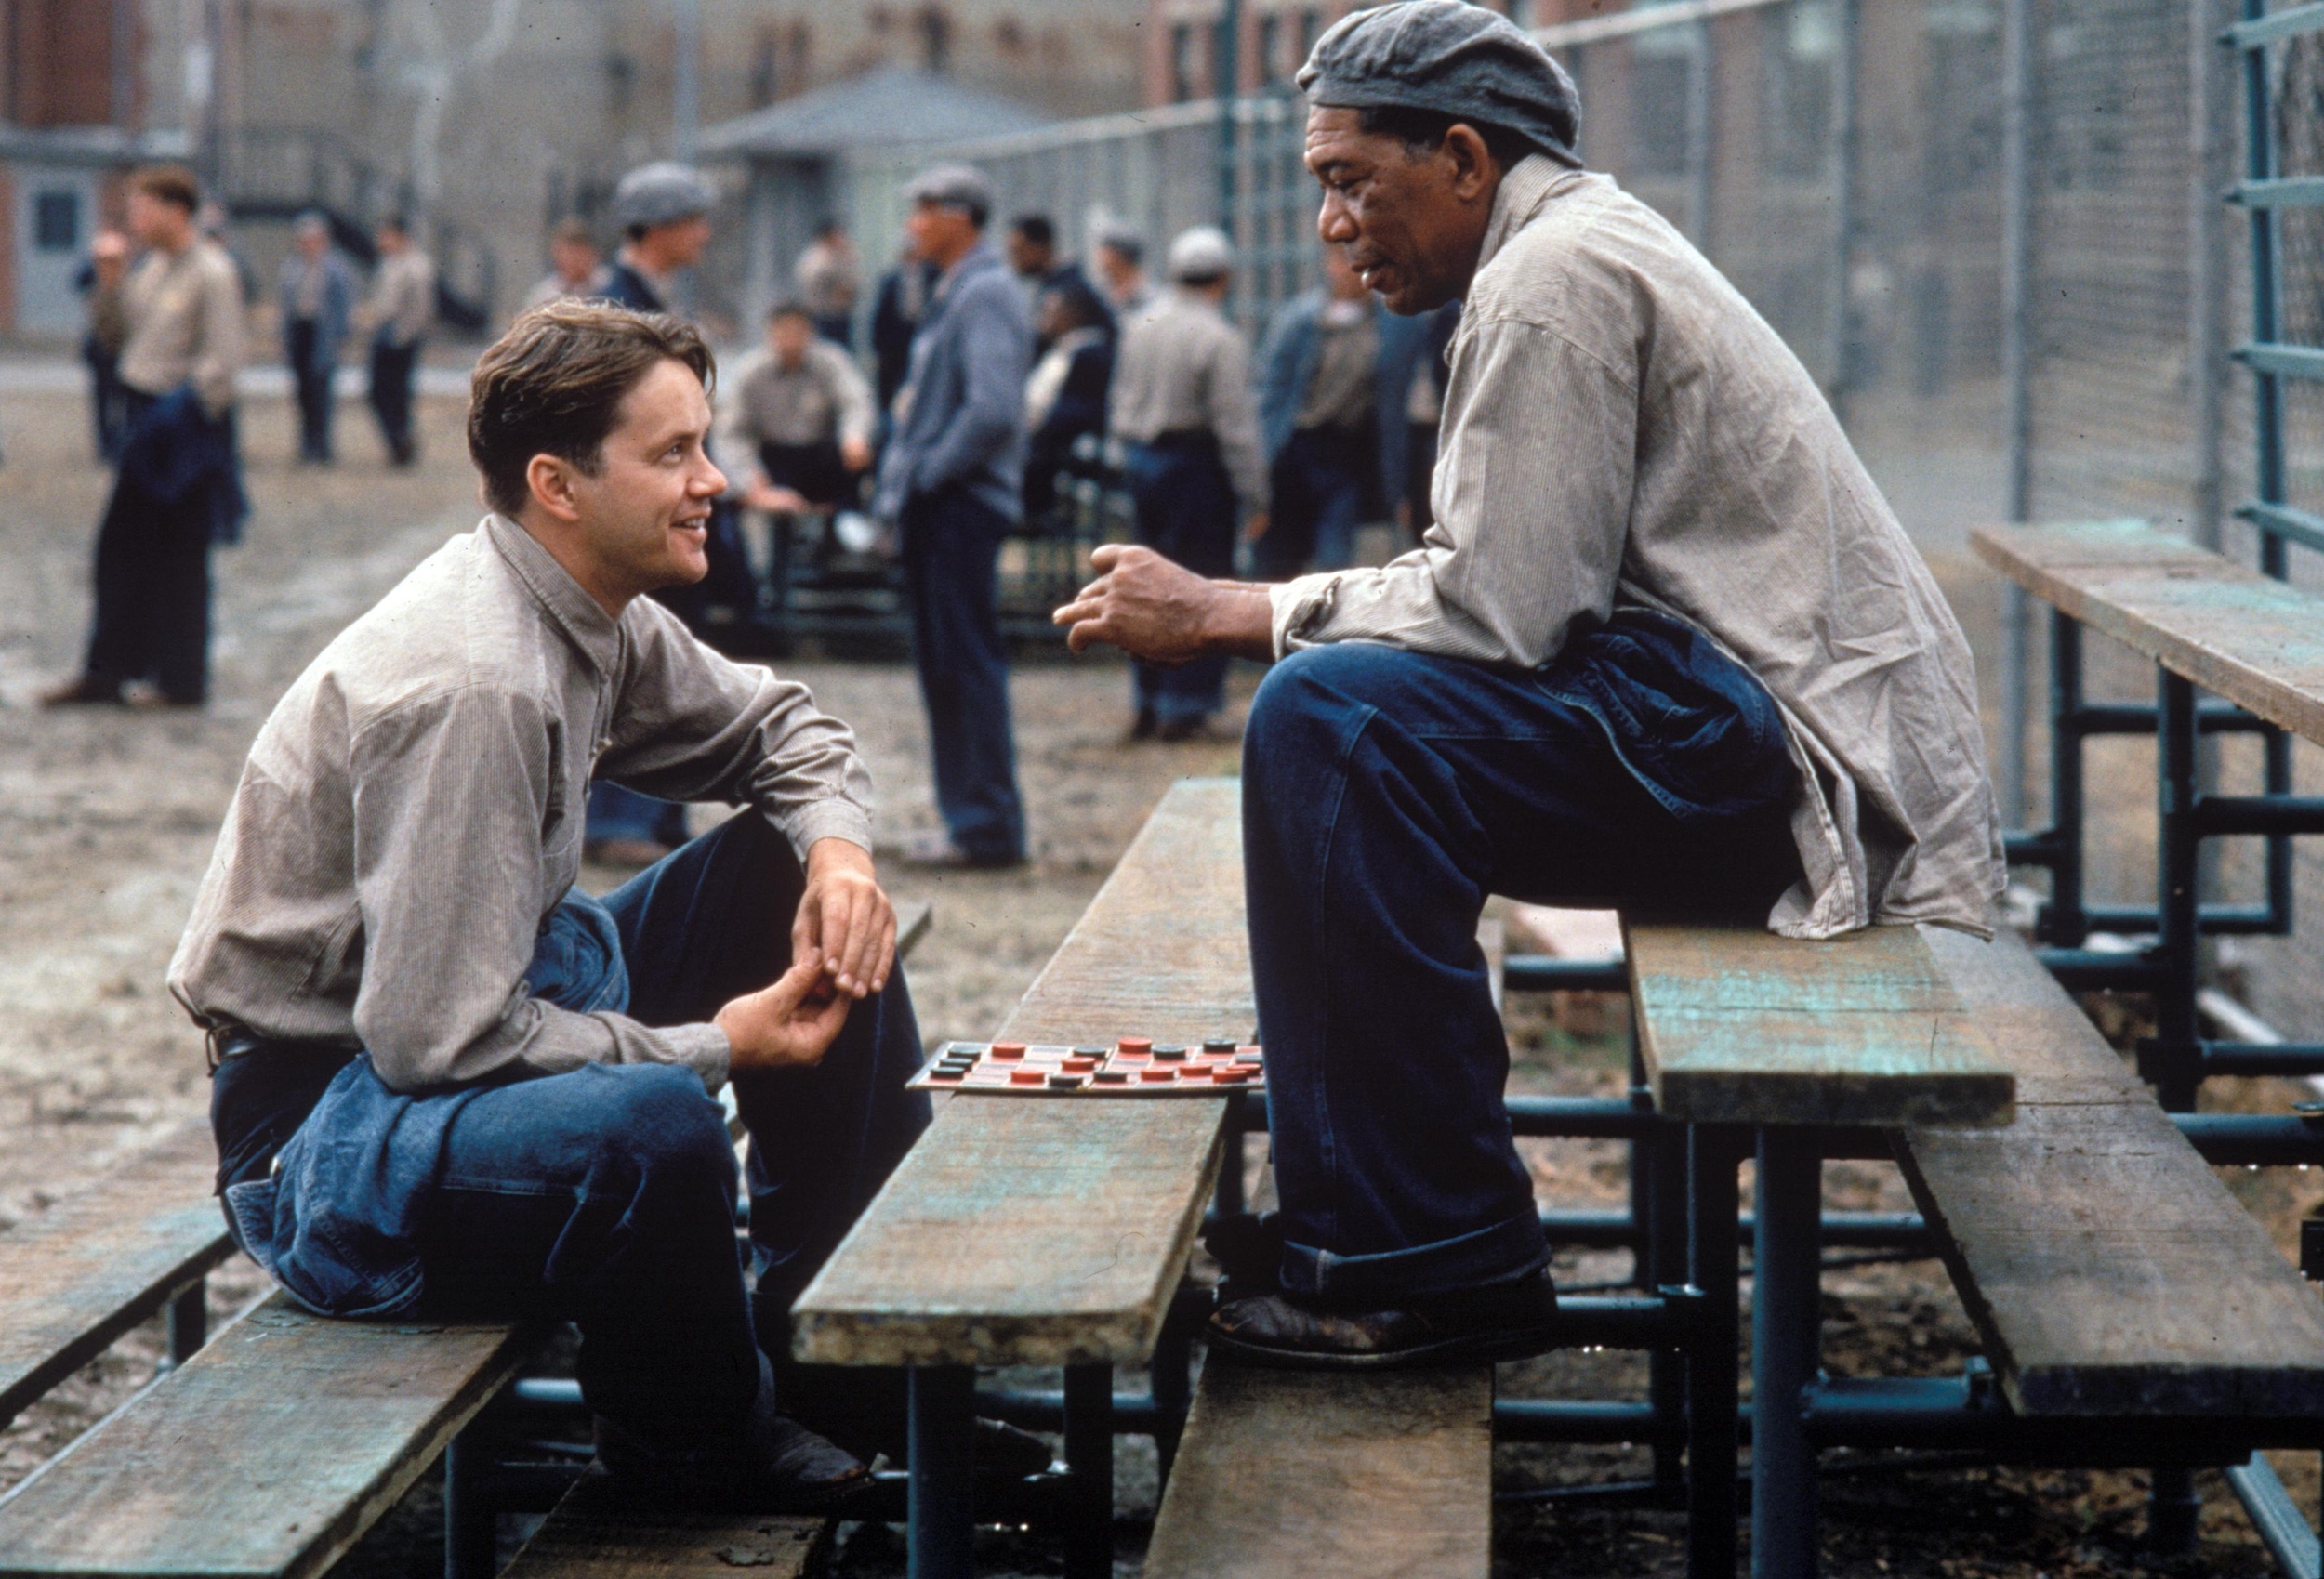 <p>Andy, of course, does not necessarily agree with Red. Instead, he has his own feelings on hope, the kind that helped him on his journey to escaping from Shawshank.</p><p>You may also like: <a href='https://www.yardbarker.com/entertainment/articles/the_25_best_songs_about_america_091223/s1__29454740'>The 25 best songs about America</a></p>